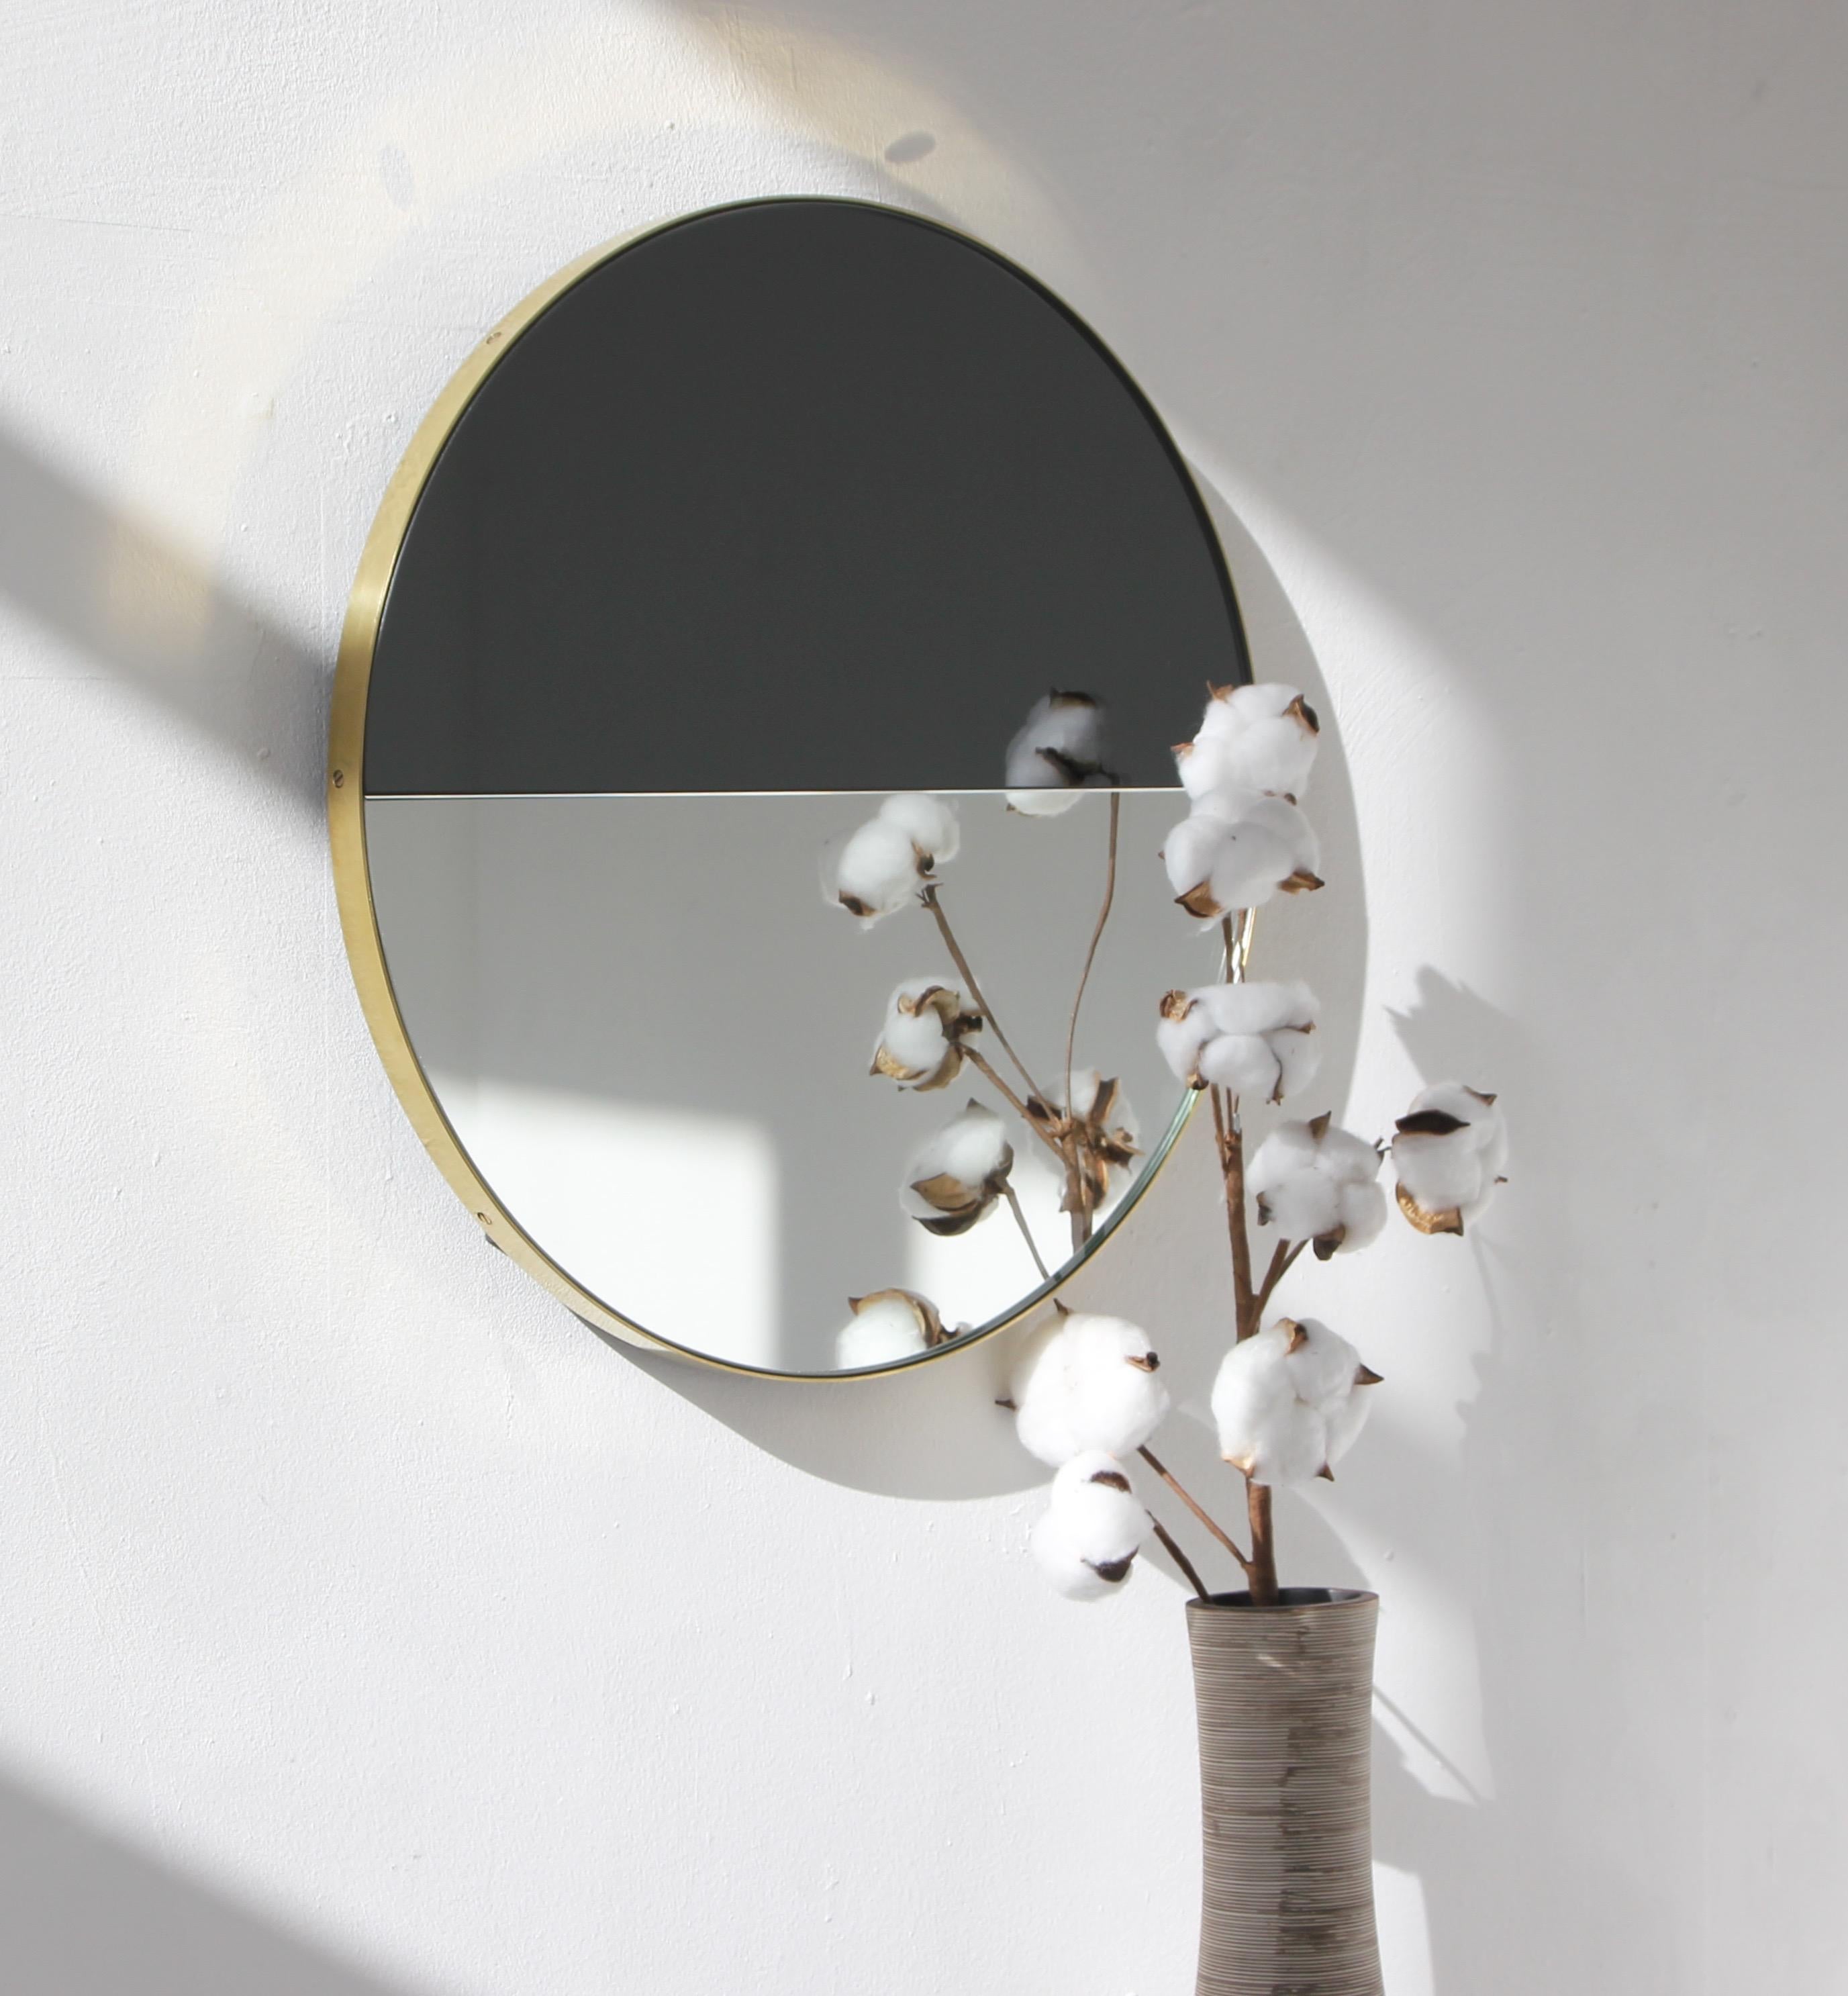 Orbis Dualis Mixed Tint Contemporary Round Mirror with Brass Frame, Medium In New Condition For Sale In London, GB